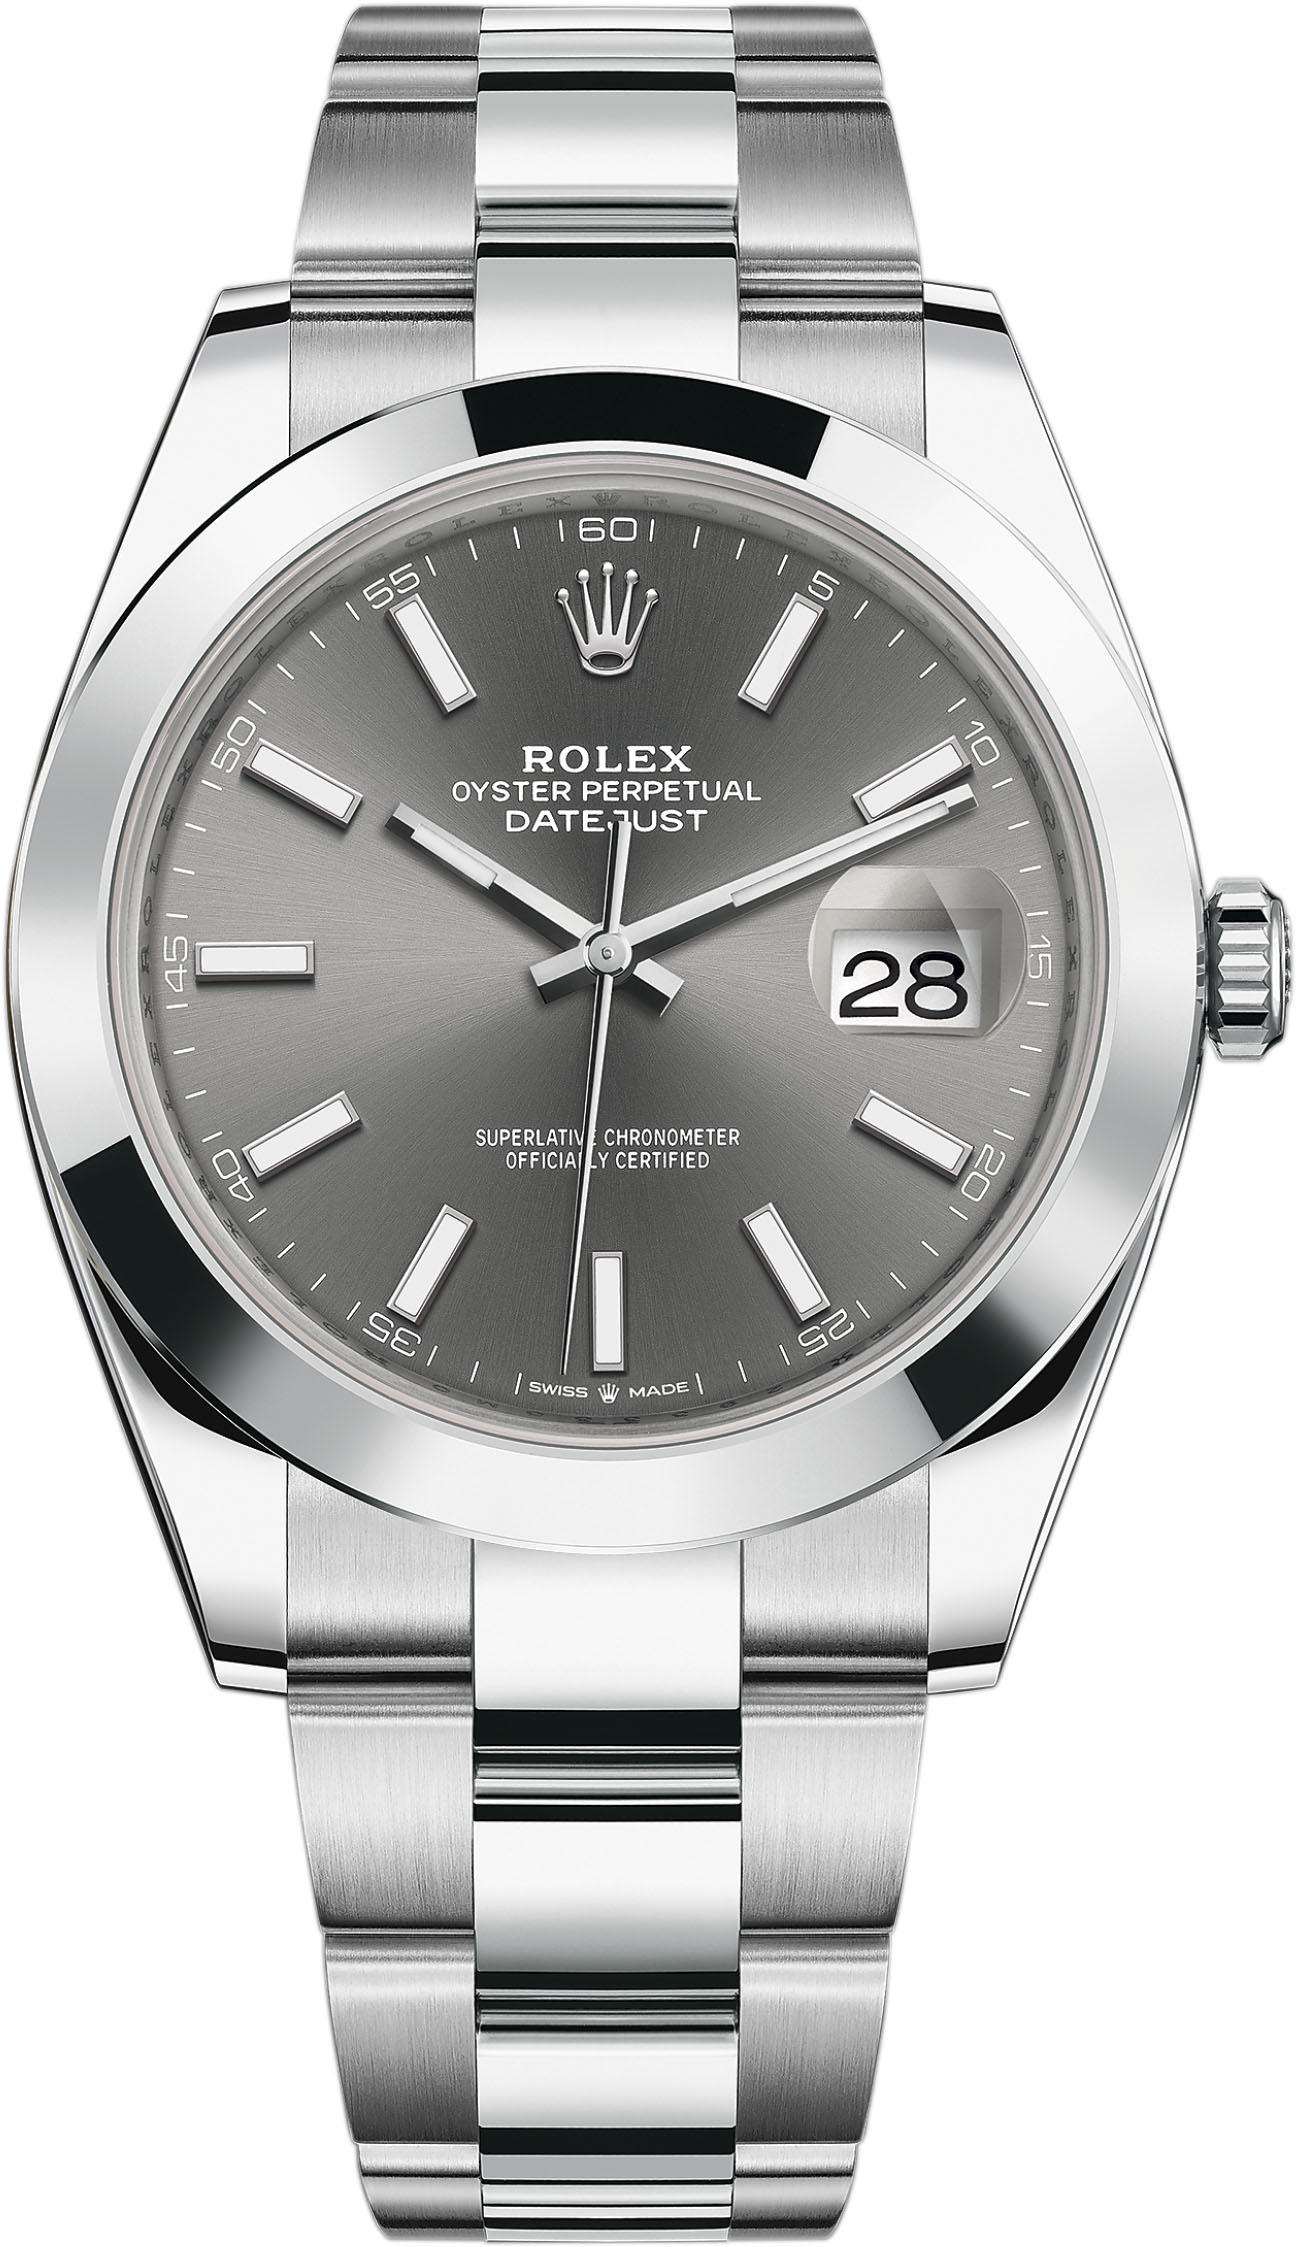 ROLEX Slate Dial Oyster Perpetual Datejust 41 126300